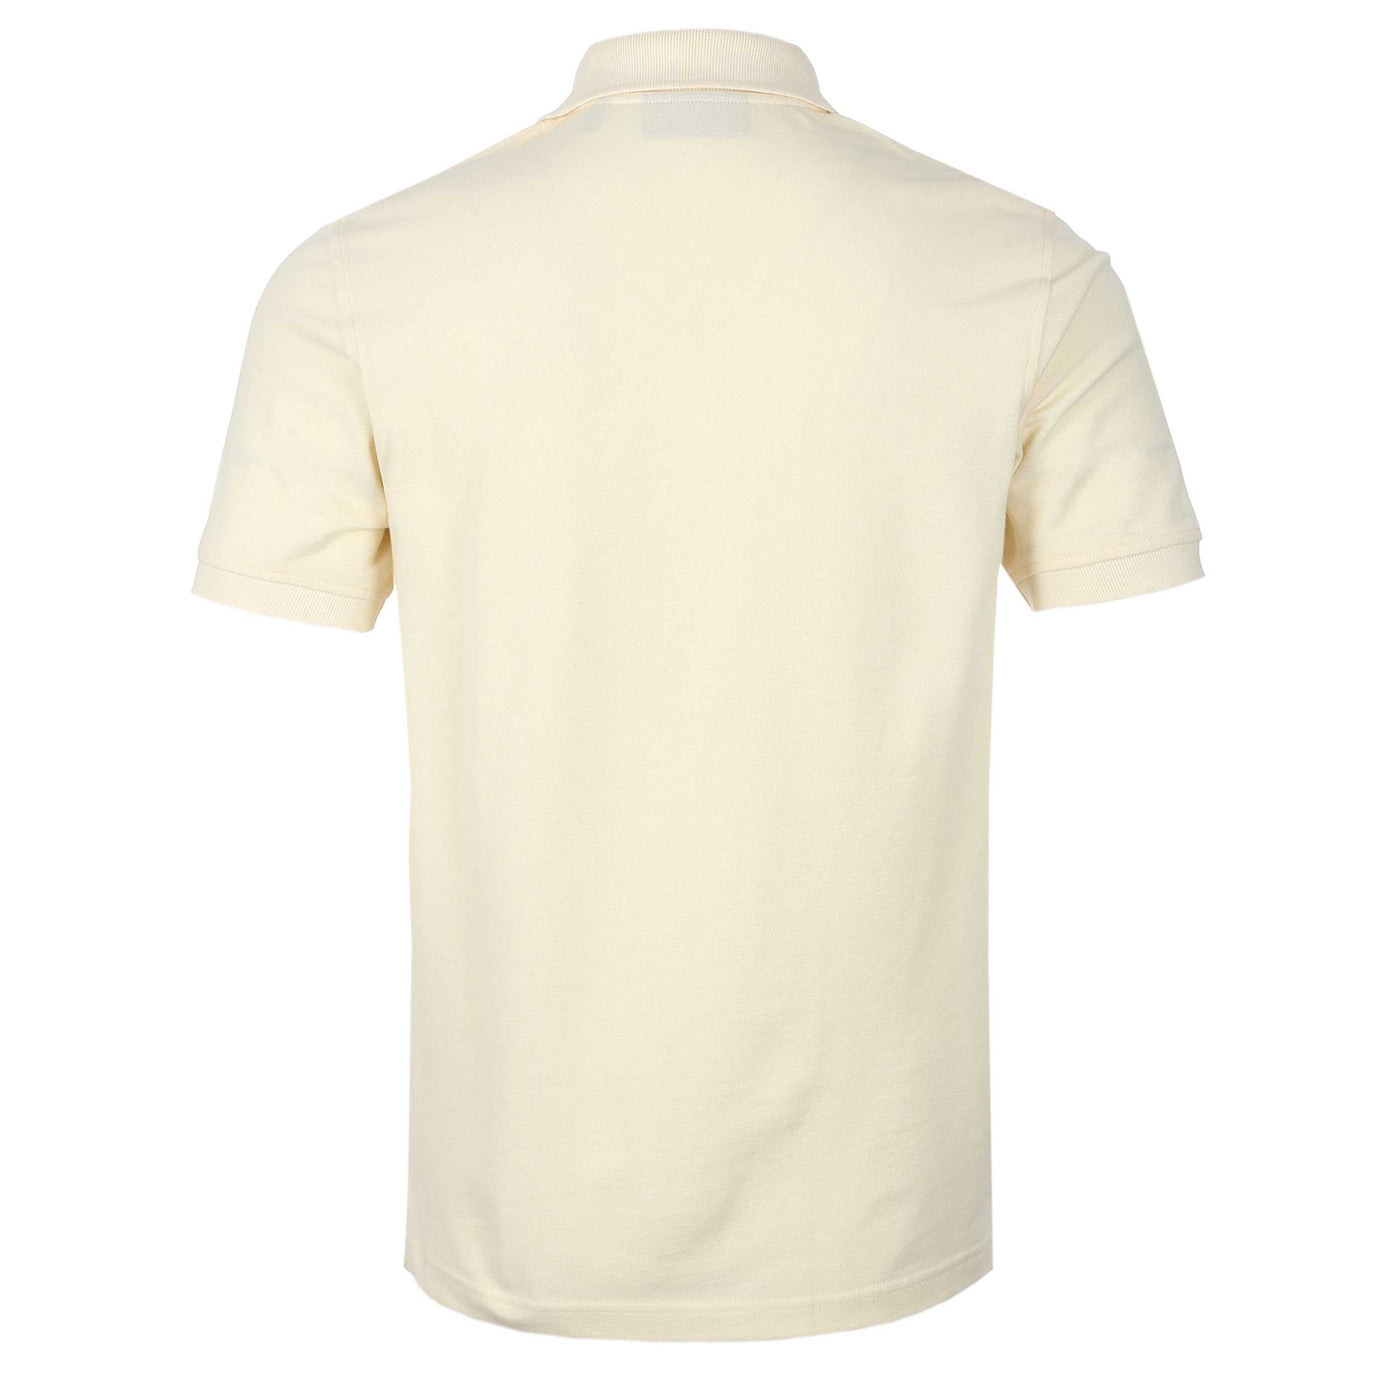 Belstaff Classic Short Sleeve Polo Shirt in Yellow Sand Back